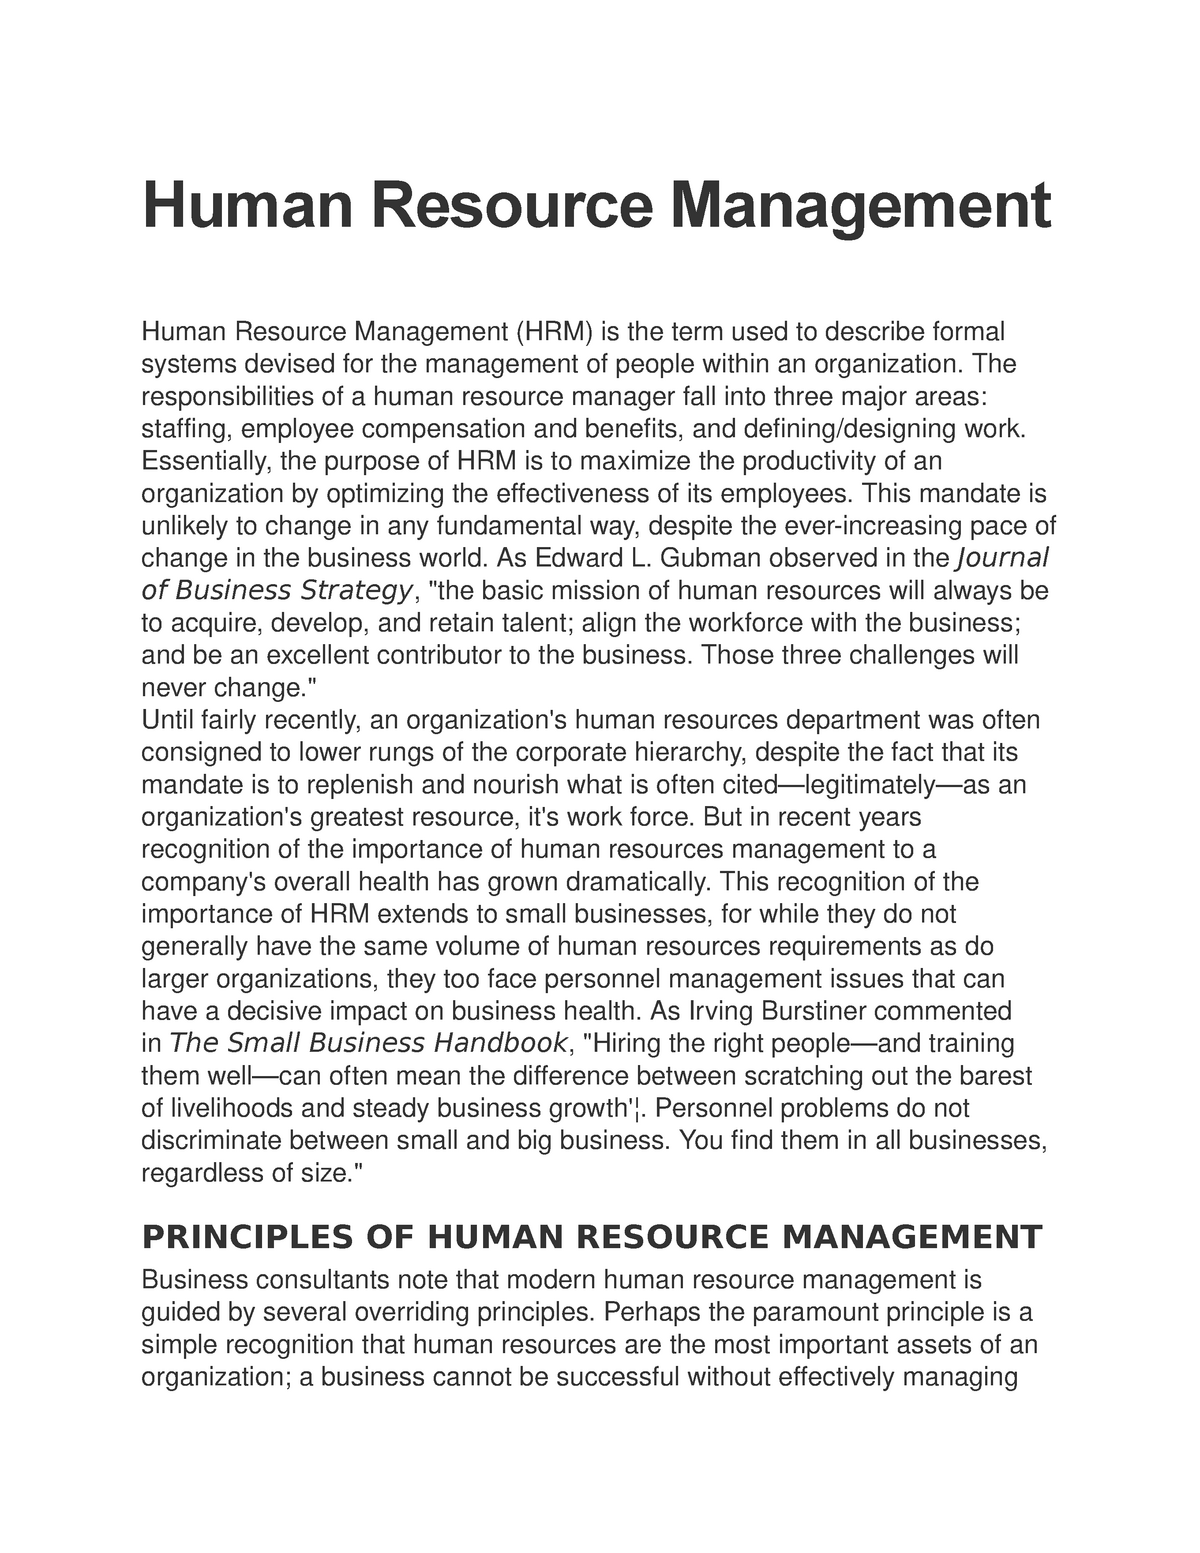 thesis topic in human resource management